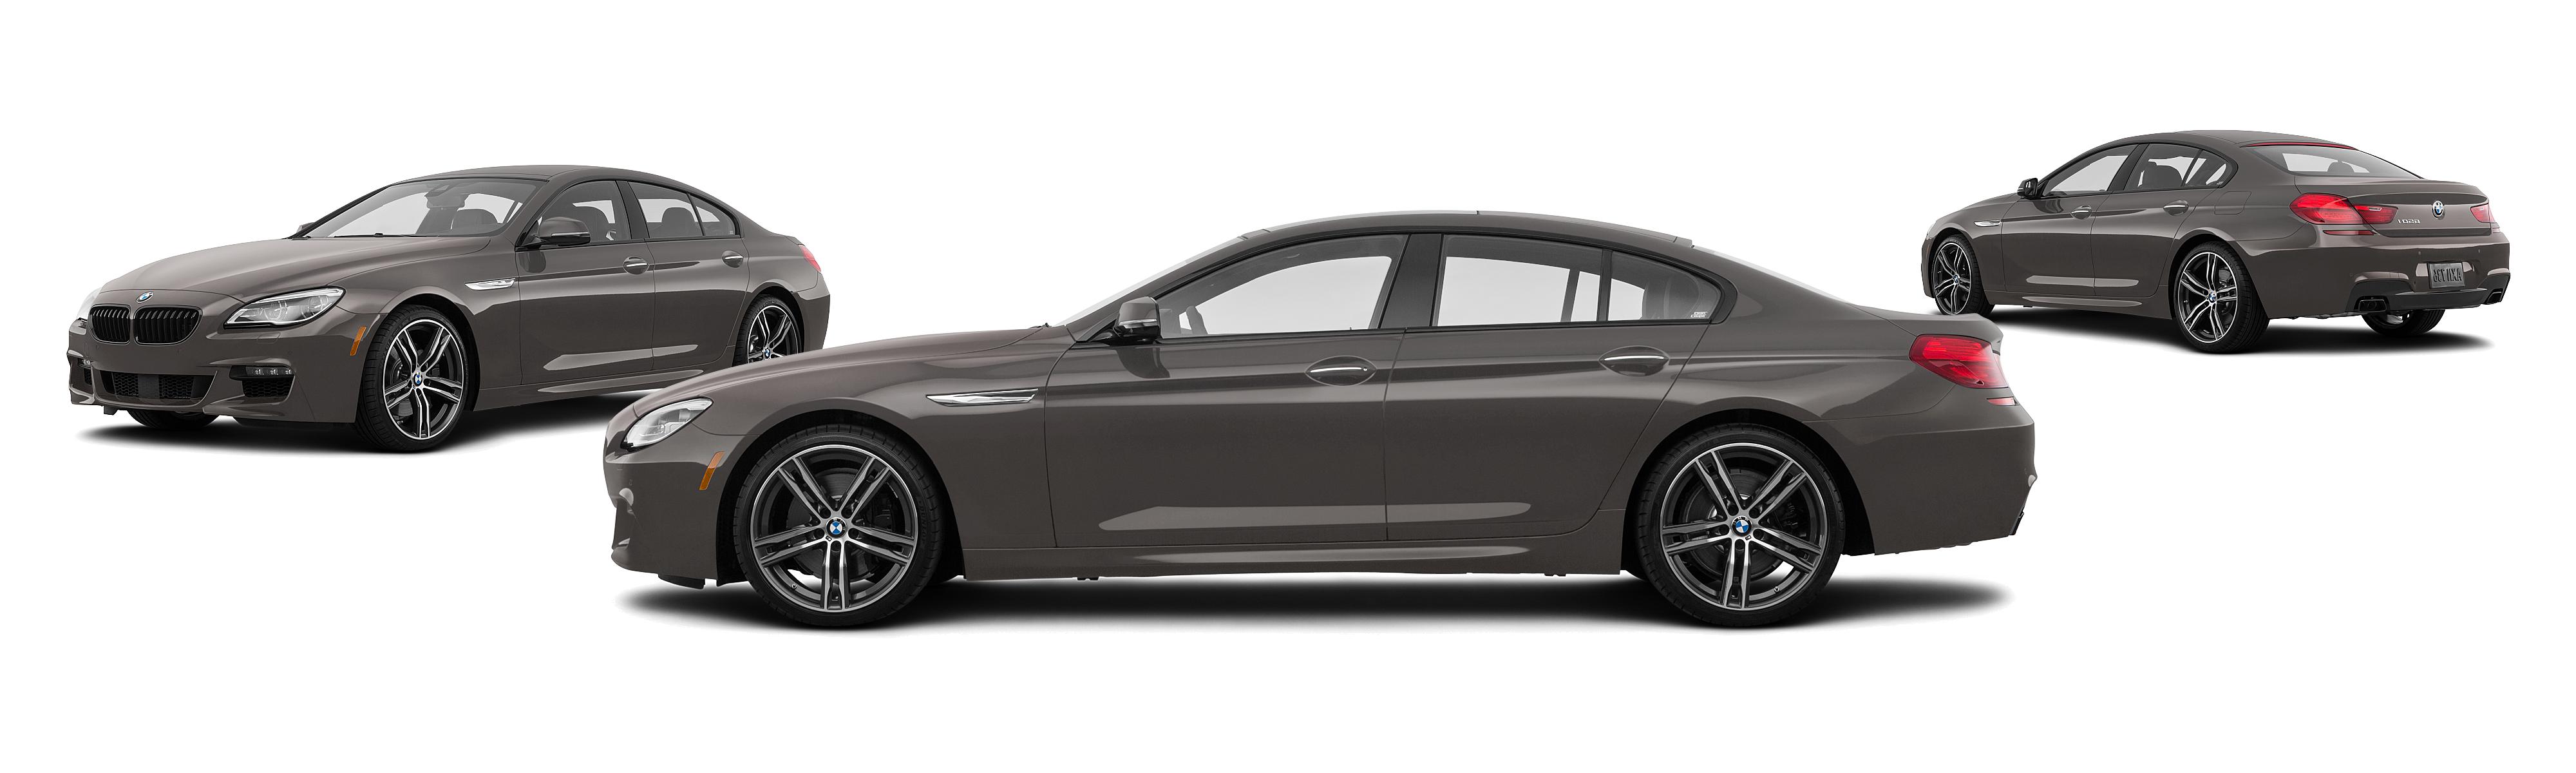 2019 BMW 6 Series 650i Gran Coupe 4dr Sedan - Research - GrooveCar